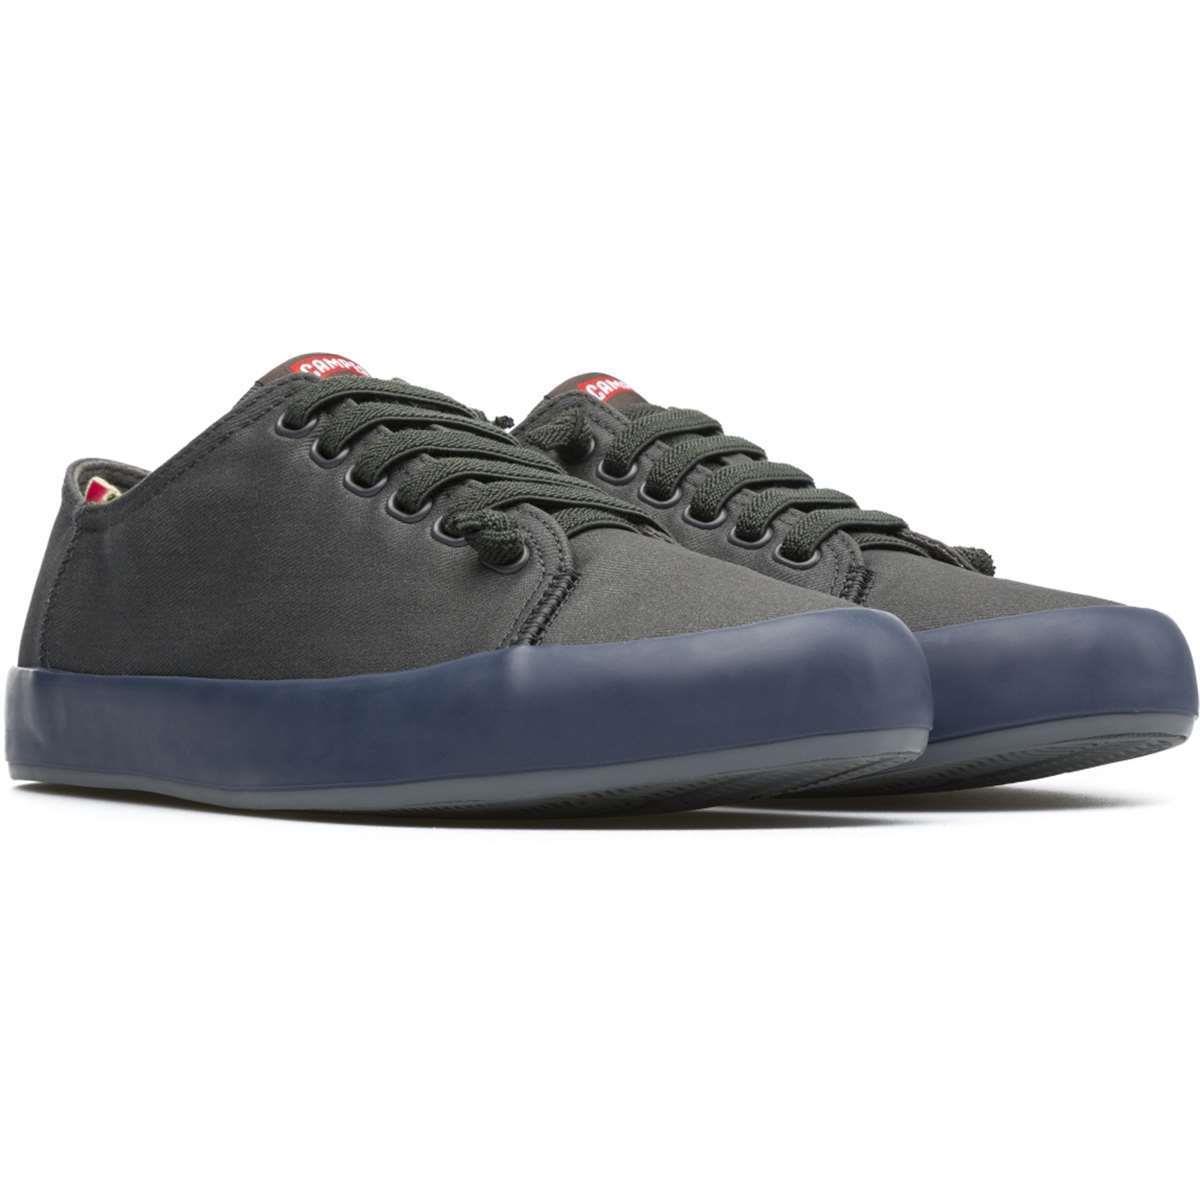 Camper Men Casual Shoes Andratx K100 Low Top Leather Canvas Fashion Sneakers Black/Navy